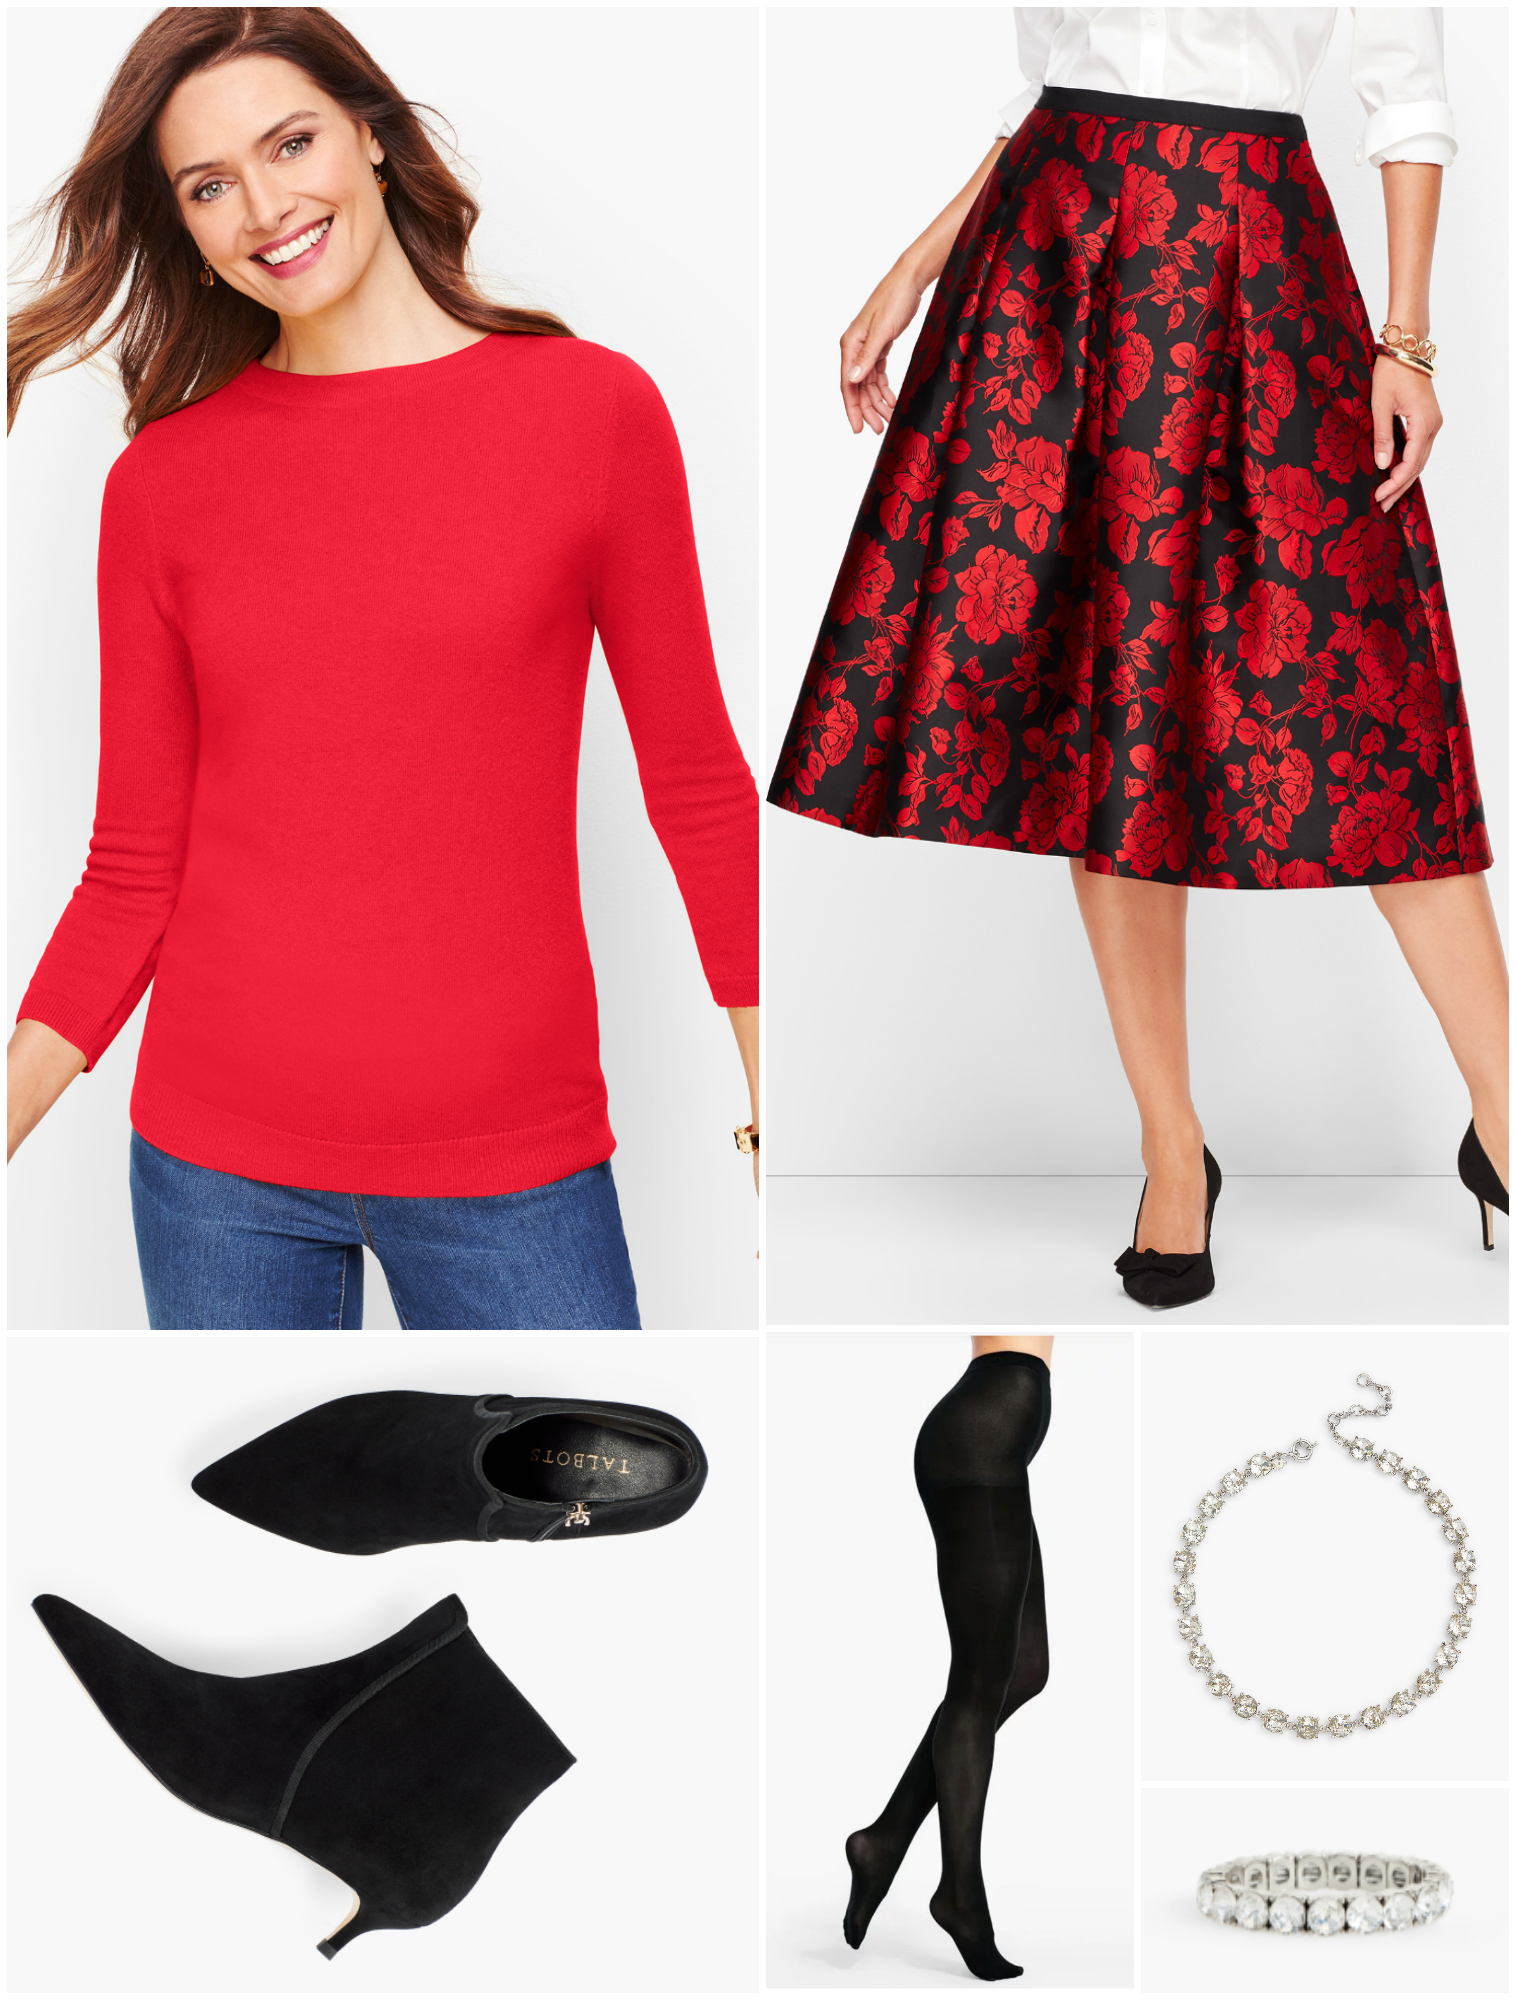 With opaque black tights and sleek suede ankle booties in the same color, a festive skirt remains formal while providing warmth.